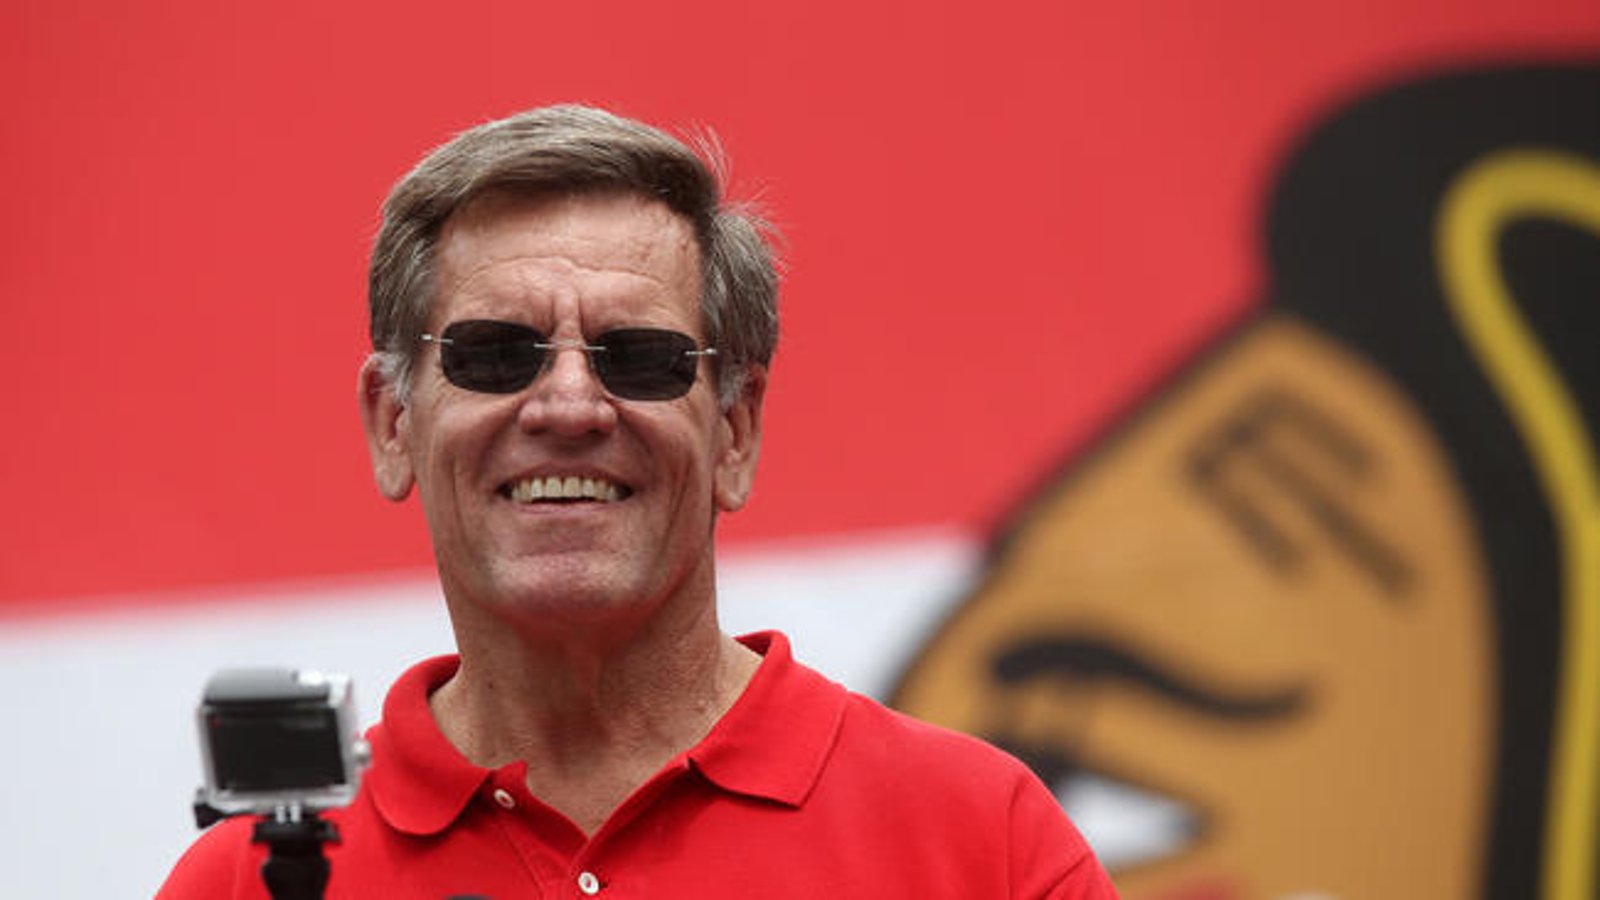 Blackhawks Owner Makes Special Announcement